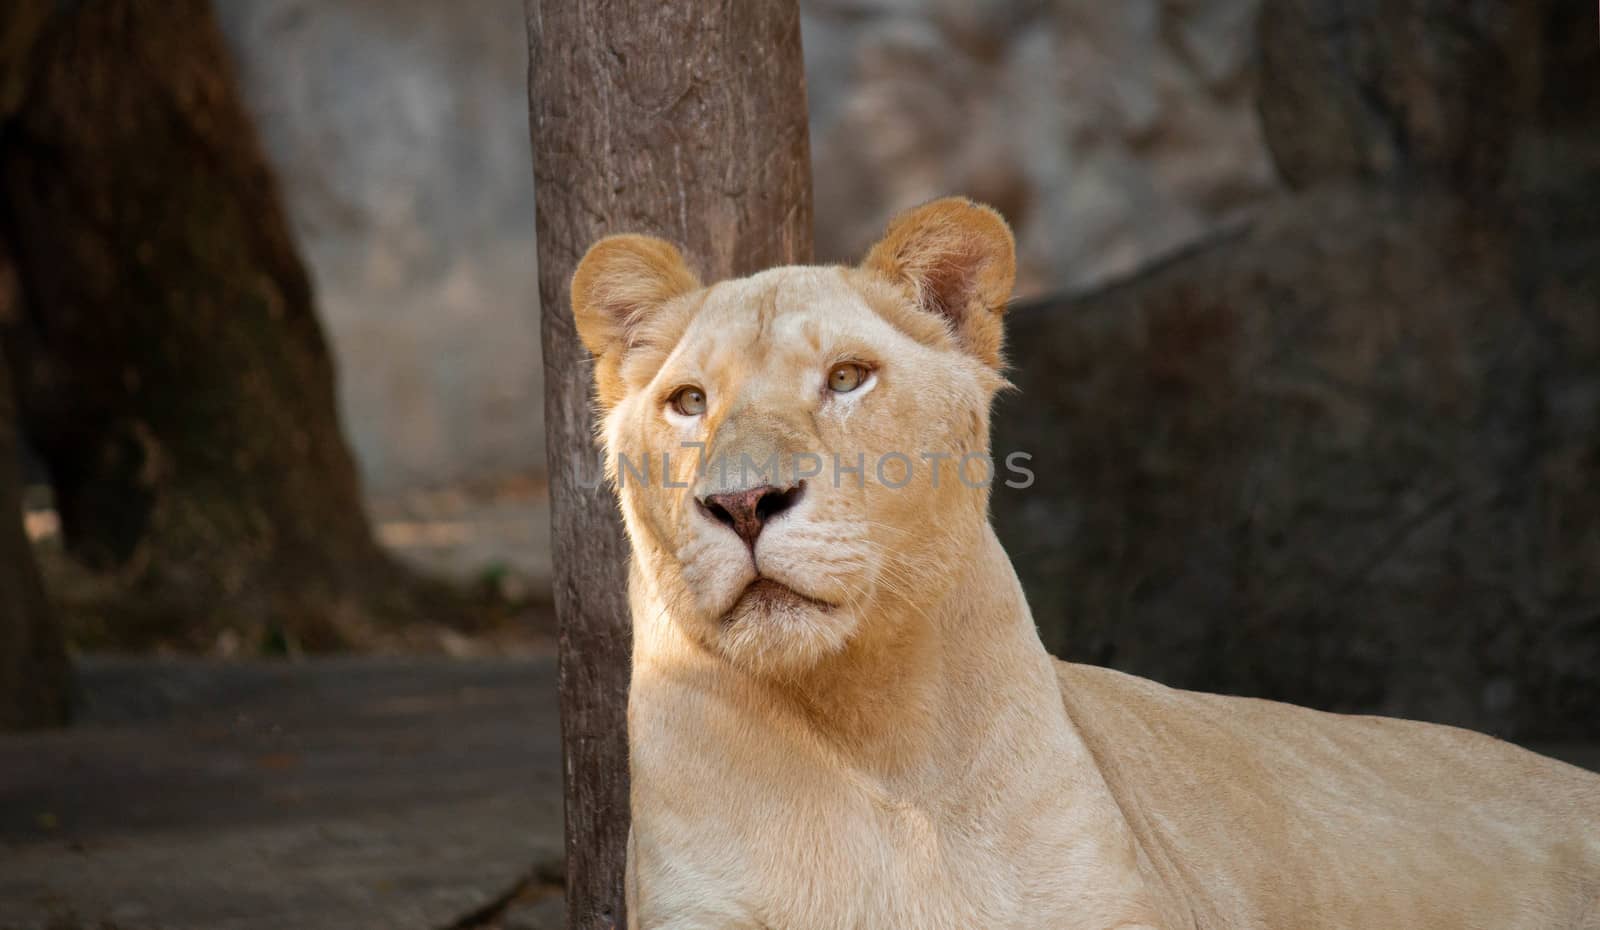 A beautiful female white lion lying on a wooden platform and looking strongly with her blue eyes in the forest.